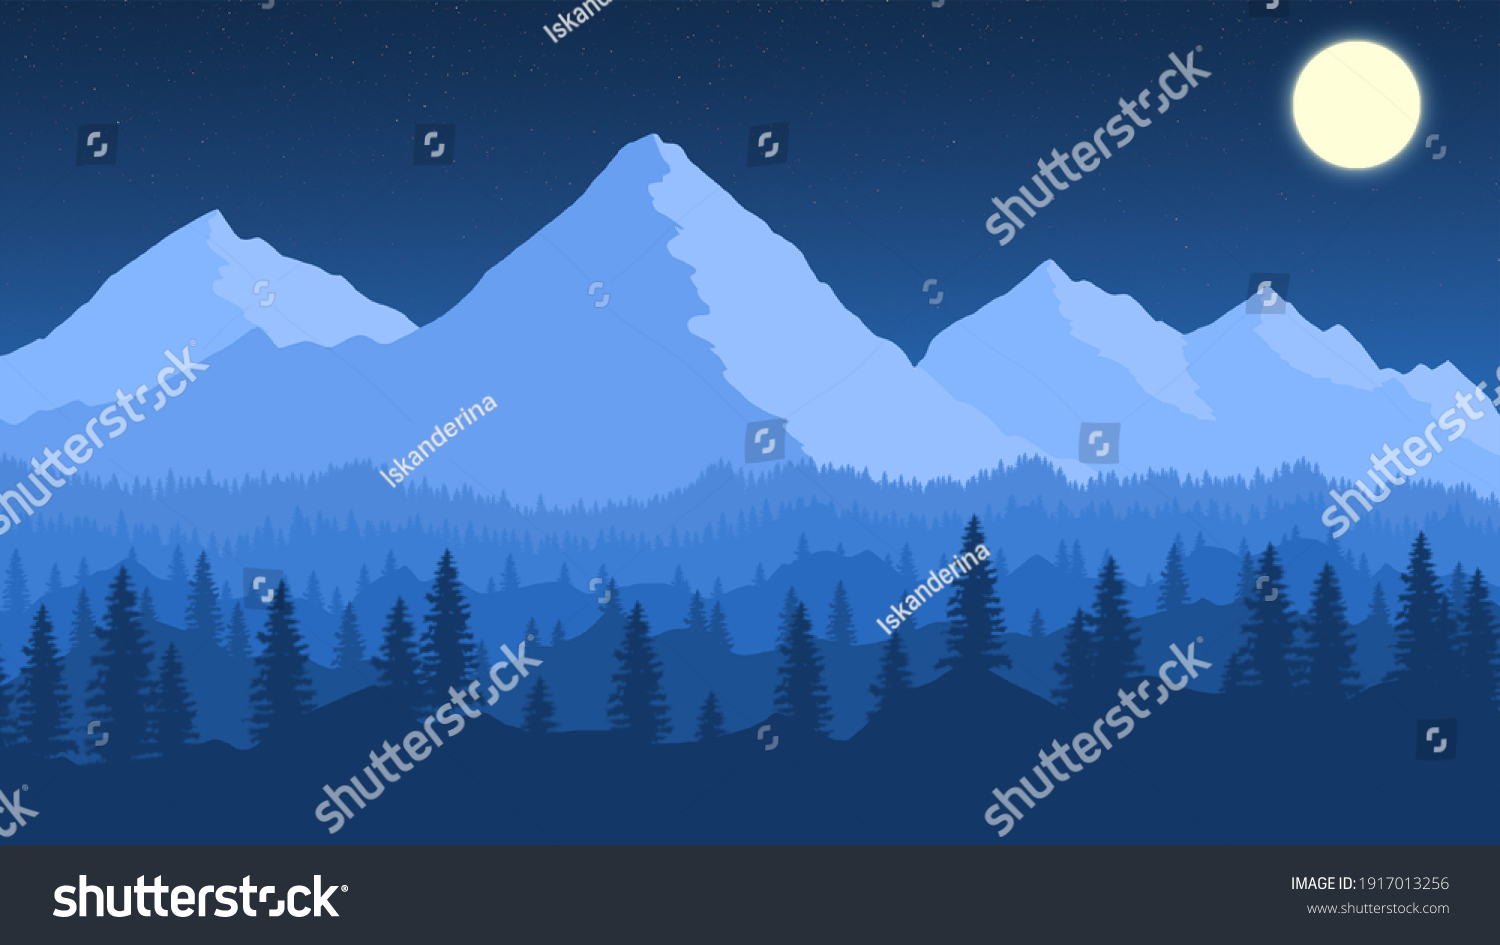 6,185,334 Mountain Forest Images, Stock Photos & Vectors | Shutterstock